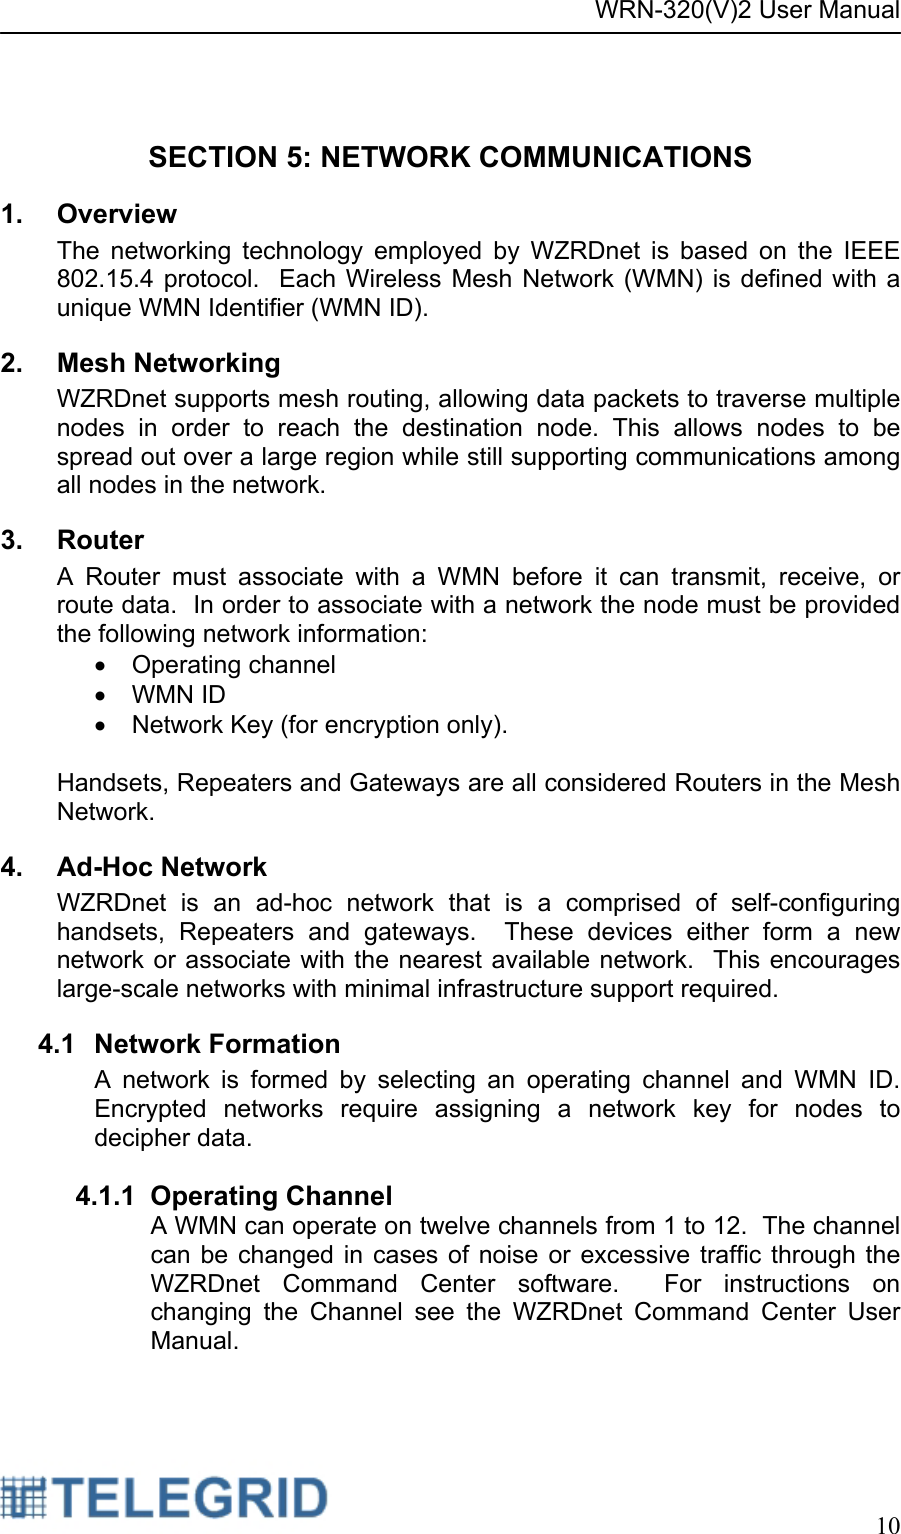 WRN-320(V)2 User Manual     10   SECTION 5: NETWORK COMMUNICATIONS 1. Overview The networking technology employed by WZRDnet is based on the IEEE 802.15.4 protocol.  Each Wireless Mesh Network (WMN) is defined with a unique WMN Identifier (WMN ID).  2. Mesh Networking WZRDnet supports mesh routing, allowing data packets to traverse multiple nodes in order to reach the destination node. This allows nodes to be spread out over a large region while still supporting communications among all nodes in the network. 3. Router A Router must associate with a WMN before it can transmit, receive, or route data.  In order to associate with a network the node must be provided the following network information: • Operating channel • WMN ID •  Network Key (for encryption only).    Handsets, Repeaters and Gateways are all considered Routers in the Mesh Network. 4. Ad-Hoc Network WZRDnet is an ad-hoc network that is a comprised of self-configuring handsets, Repeaters and gateways.  These devices either form a new network or associate with the nearest available network.  This encourages large-scale networks with minimal infrastructure support required.   4.1 Network Formation A network is formed by selecting an operating channel and WMN ID.   Encrypted networks require assigning a network key for nodes to decipher data.  4.1.1 Operating Channel A WMN can operate on twelve channels from 1 to 12.  The channel can be changed in cases of noise or excessive traffic through the WZRDnet Command Center software.  For instructions on changing the Channel see the WZRDnet Command Center User Manual.    